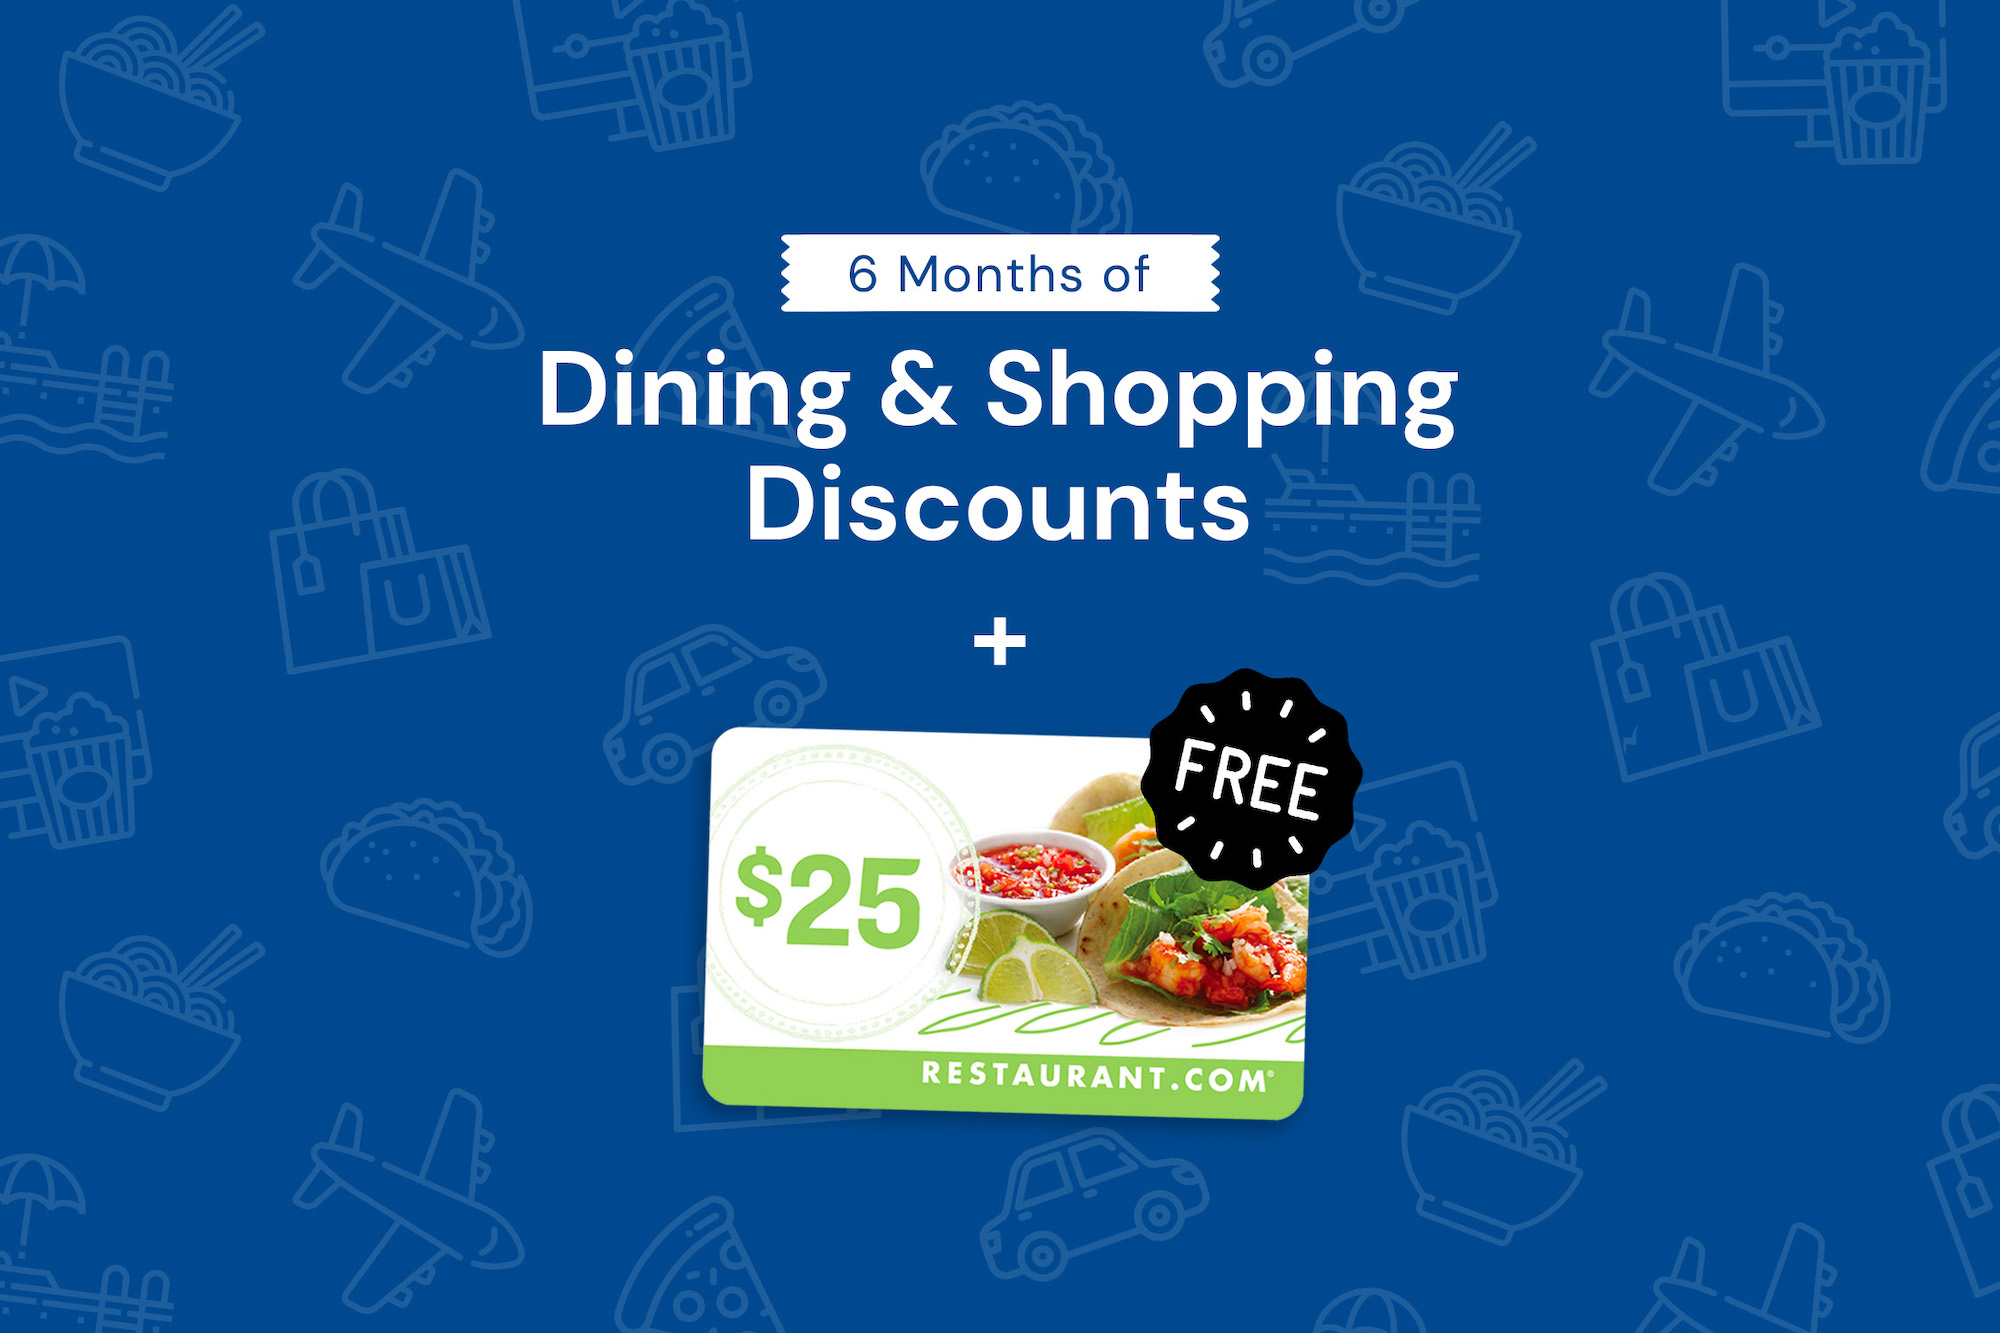 Bargain dining discounts